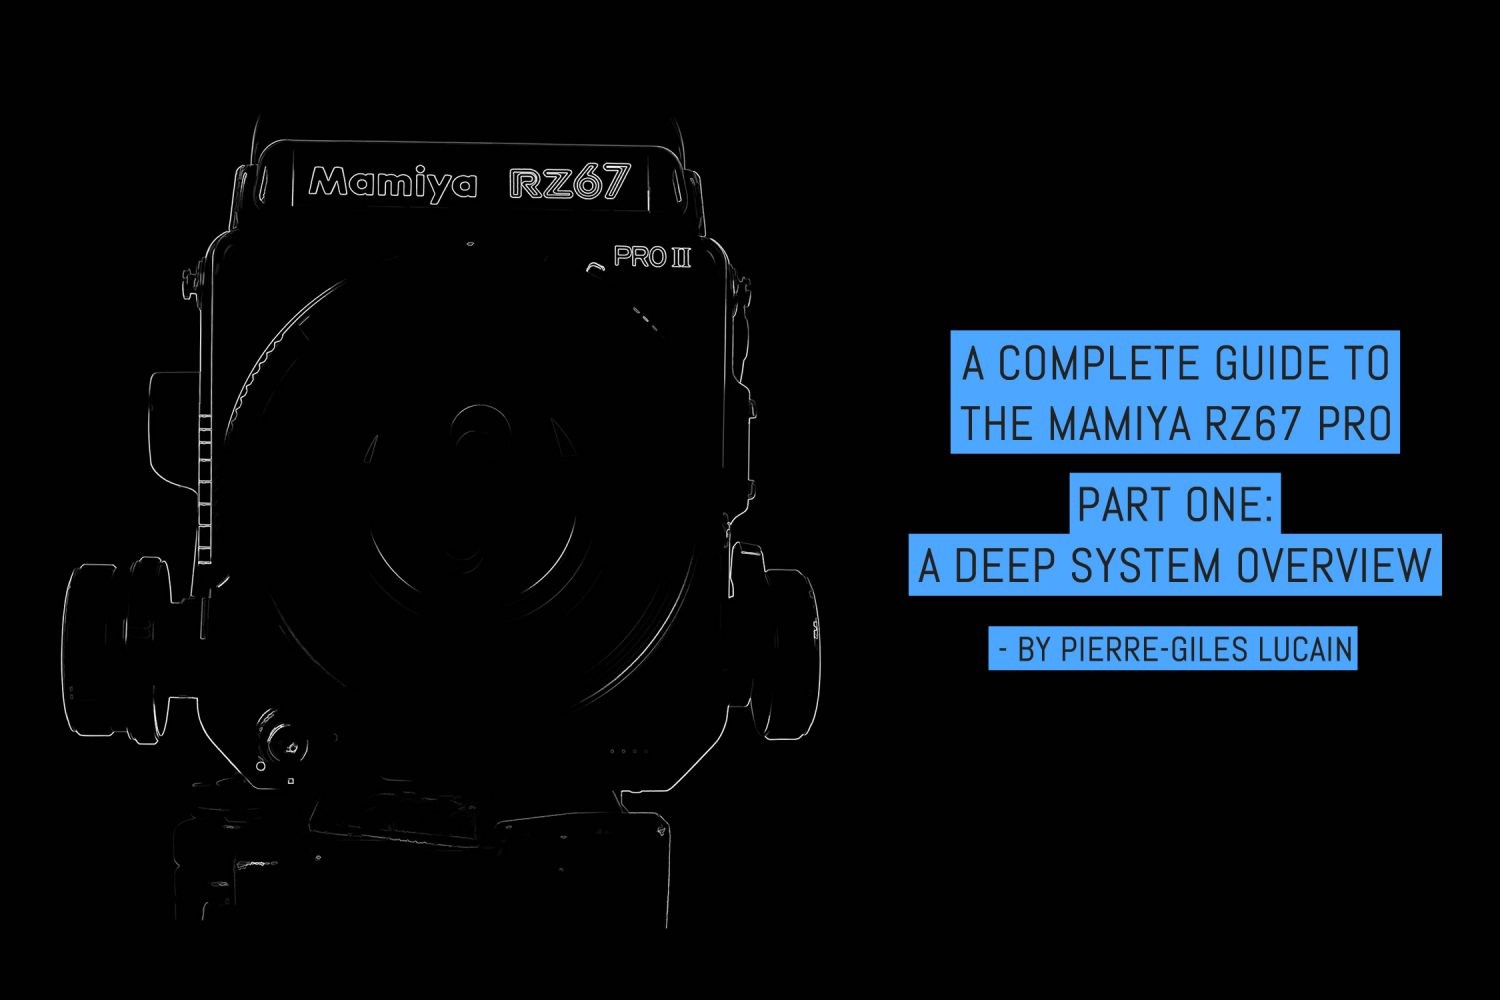 A complete guide to the Mamiya RZ67 Pro: part one – deep system overview